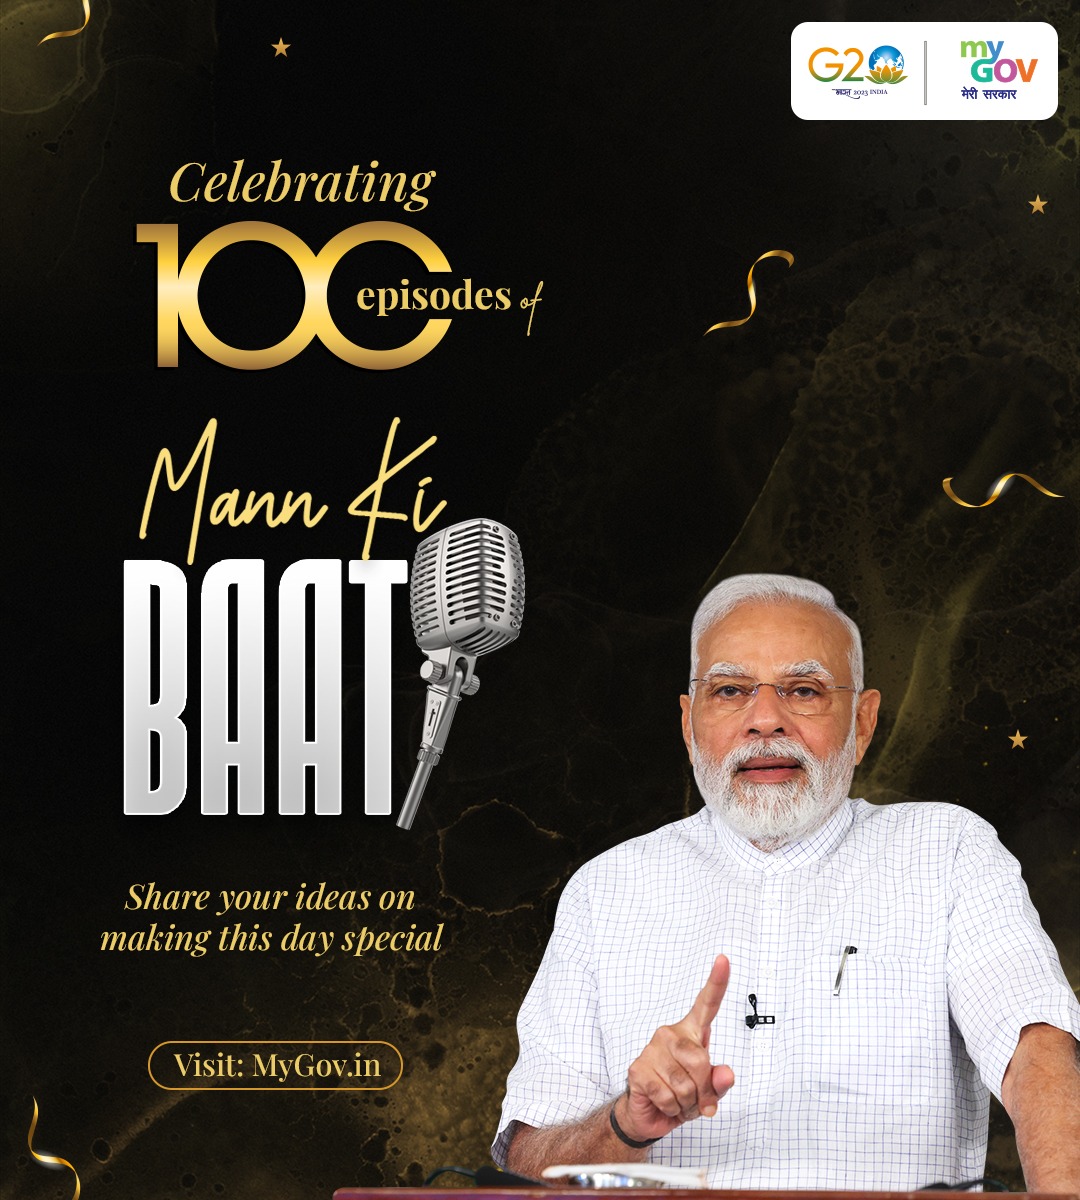 Govt to release commemorative coin of ₹100 on 100th episode of Maan Ki Baat